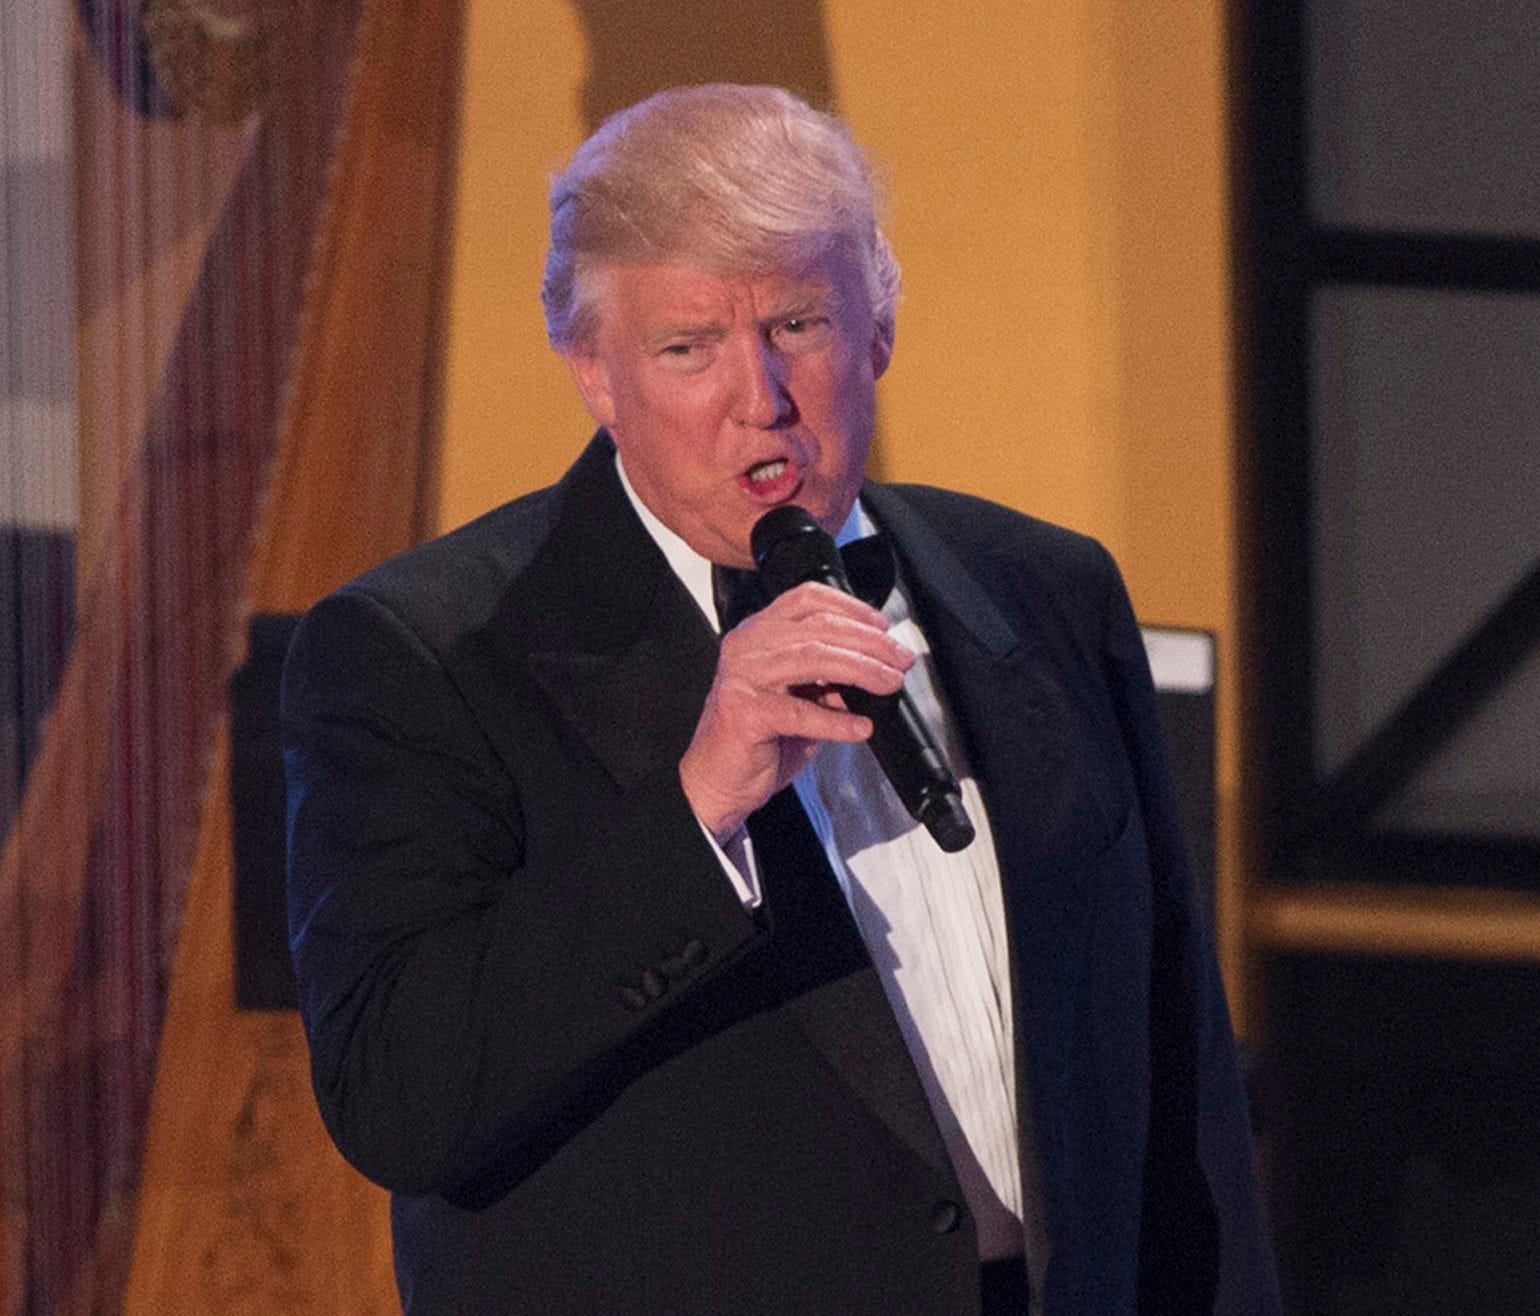 President-elect Donald J. Trump speaks during the Candlelight Dinner at Union Station, one day before Trump is sworn in as the 45th President of the United States.